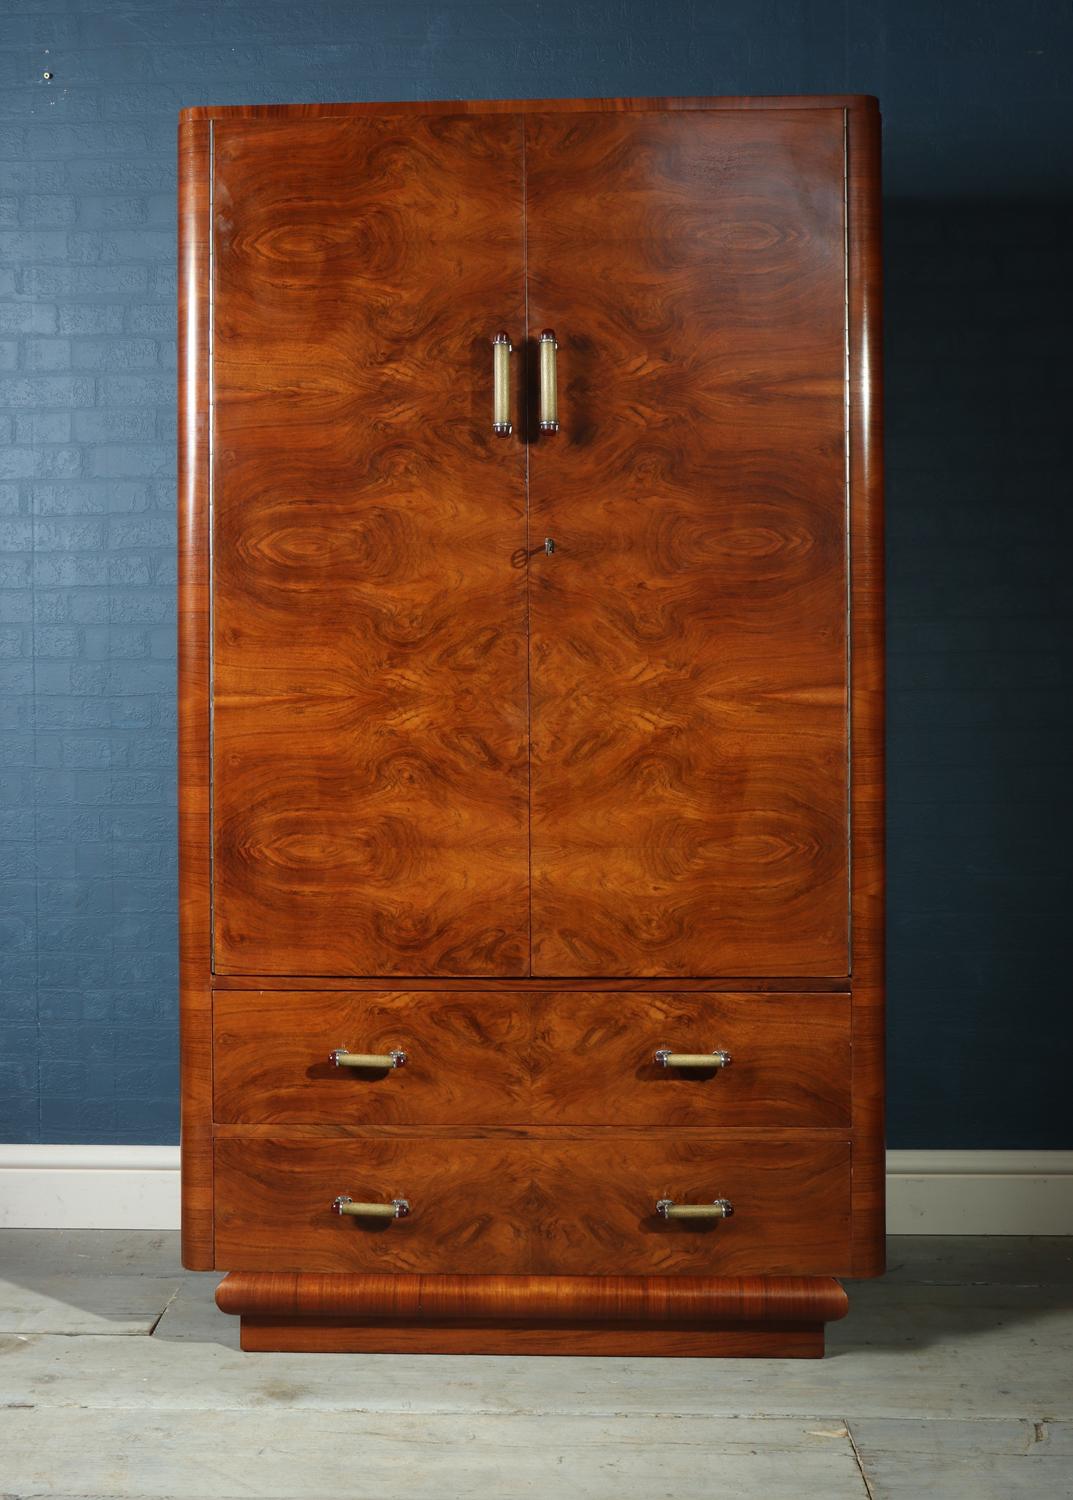 Art Deco wardrobe in walnut circa 1930
This art deco wardrobe has cupboards above with two drawers below, the interior has a hangin rail to the right and shelves to the left, the wardrobe has been polished and is in excellent condition